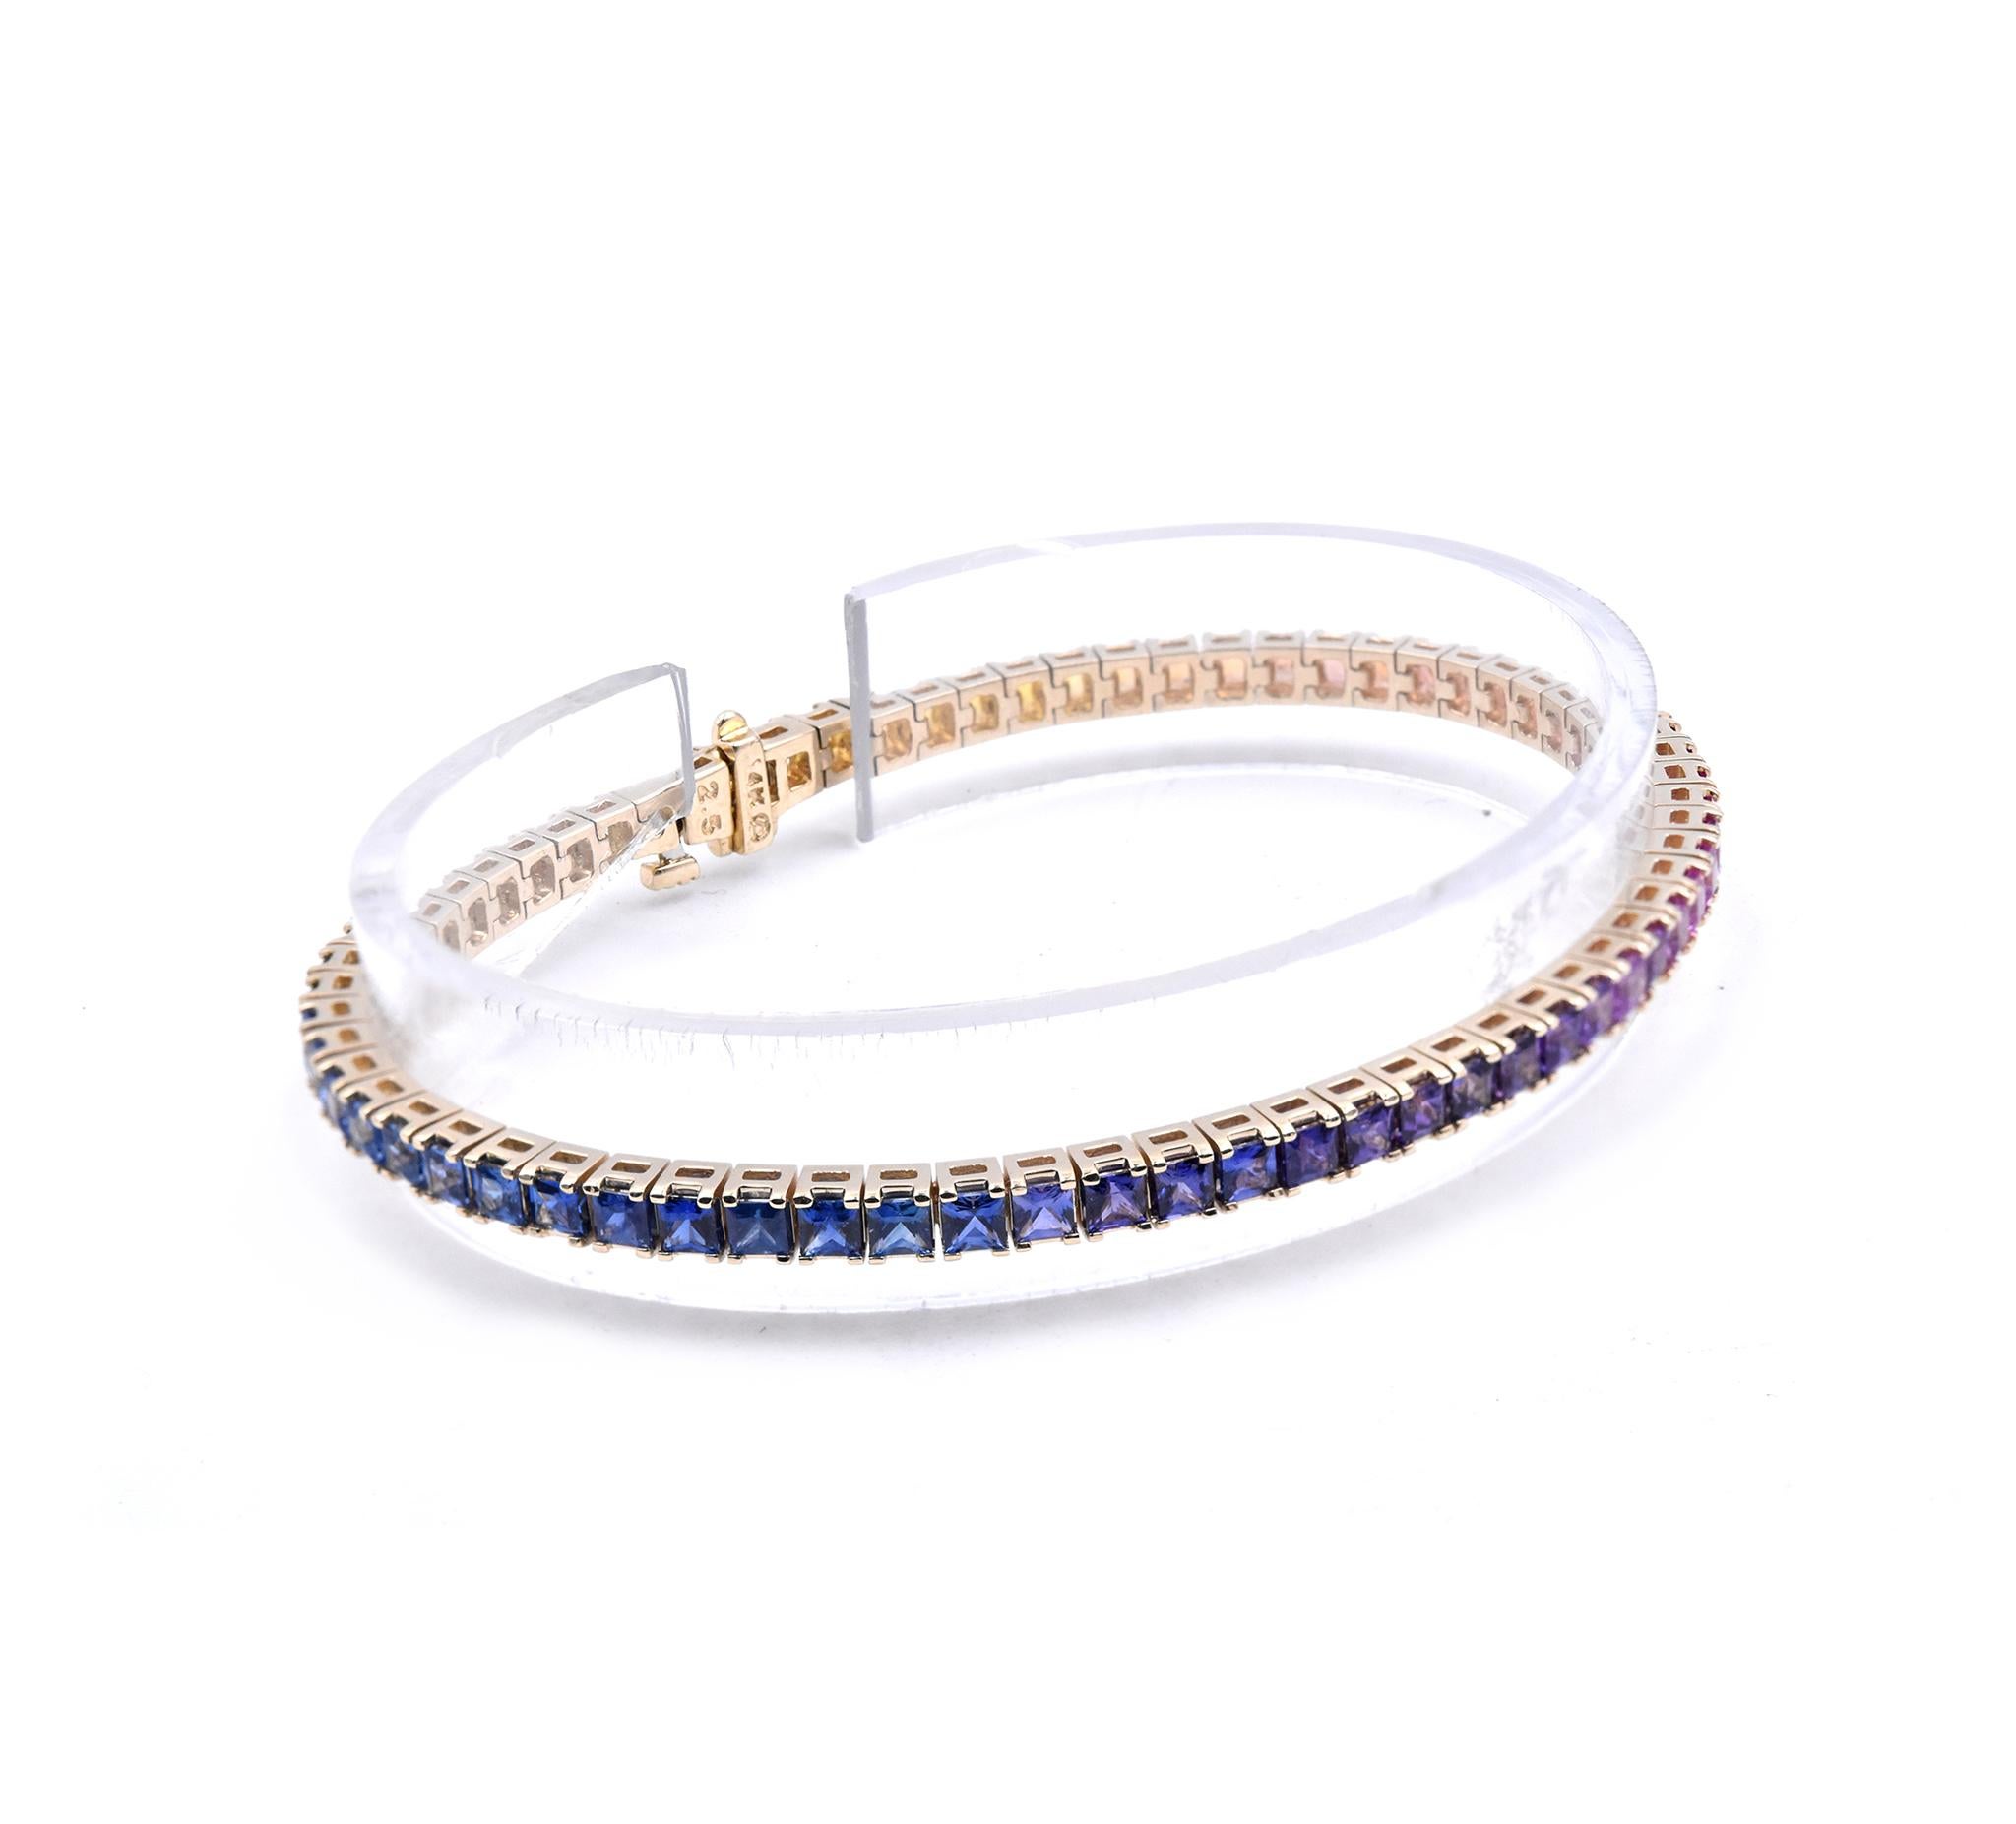 
Material: 14K yellow gold
Sapphire: 66 square cut = 6.48cttw
Color: Rainbow
Clarity: AAA+
Dimensions: bracelet will fit a 7-inch wrist
Weight: 12.23 grams
